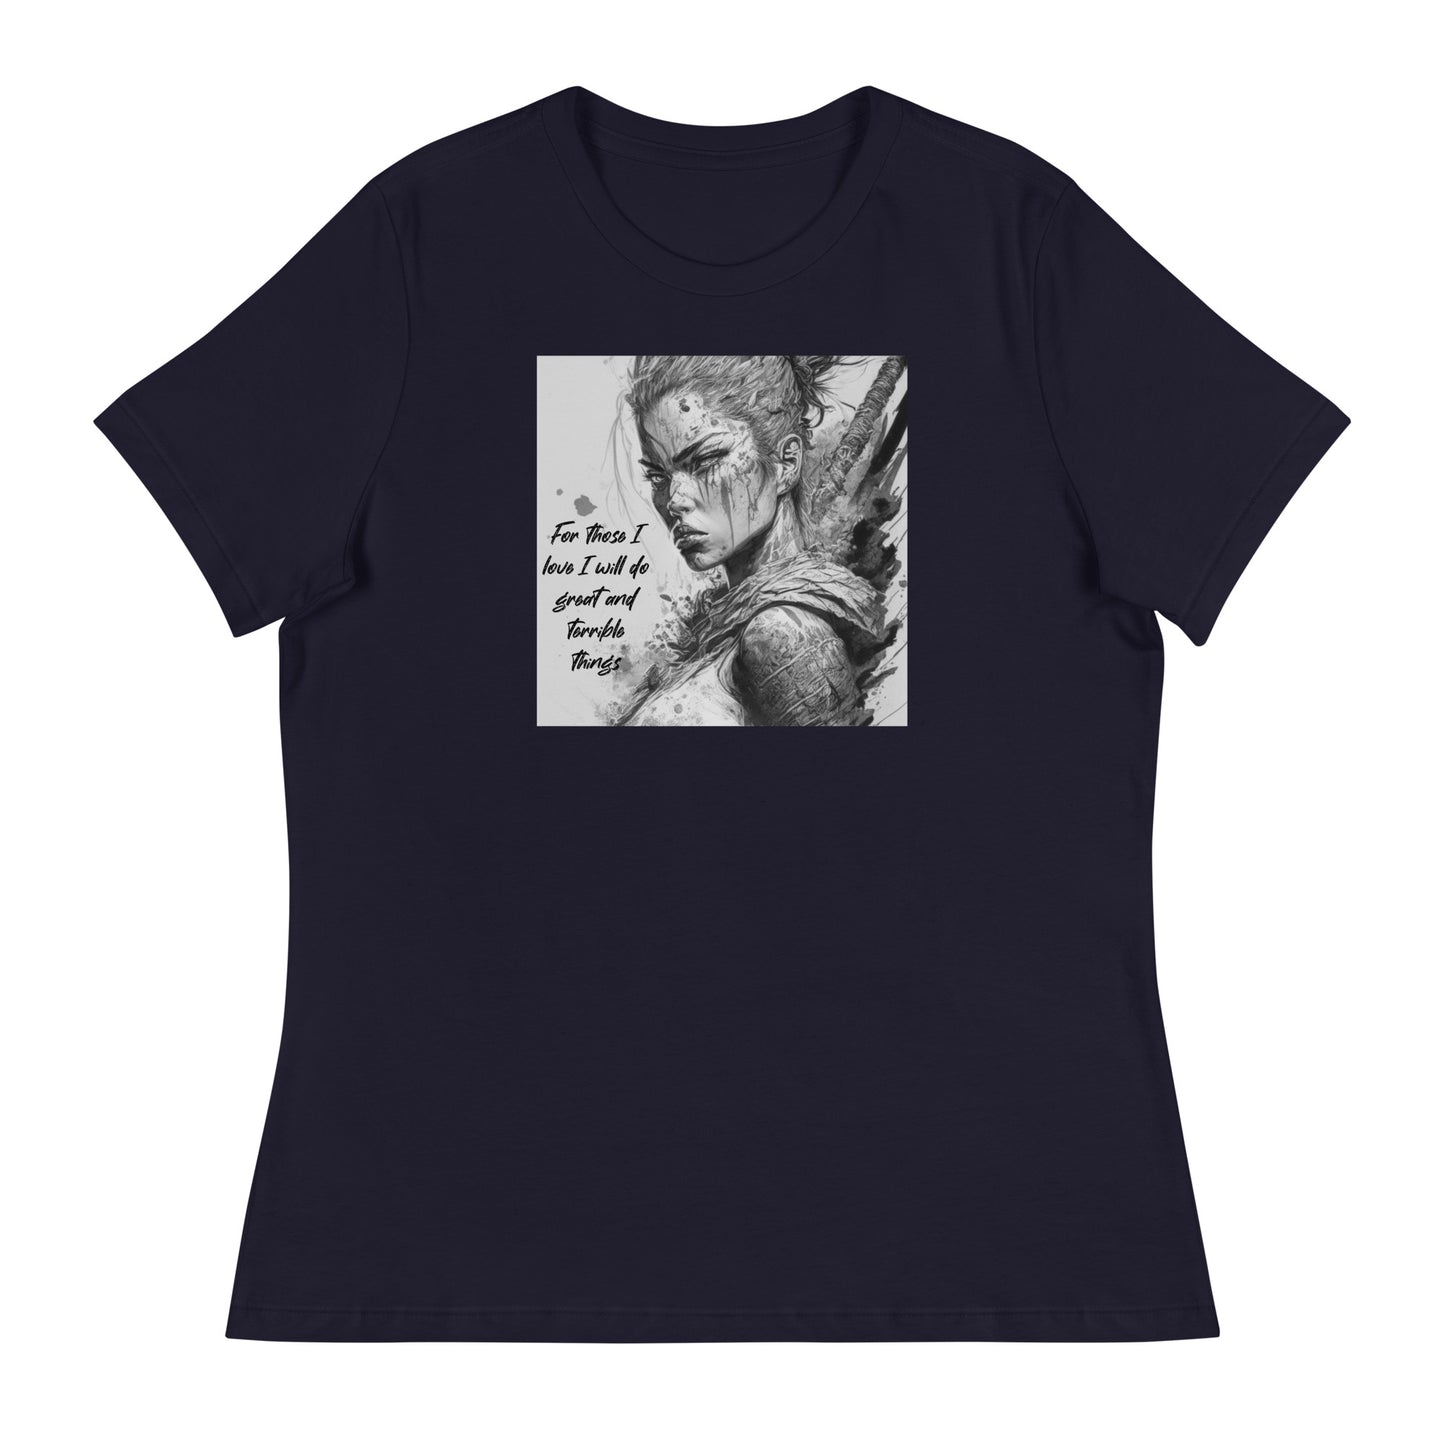 Great and Terrible Things Women's Graphic T-Shirt Navy